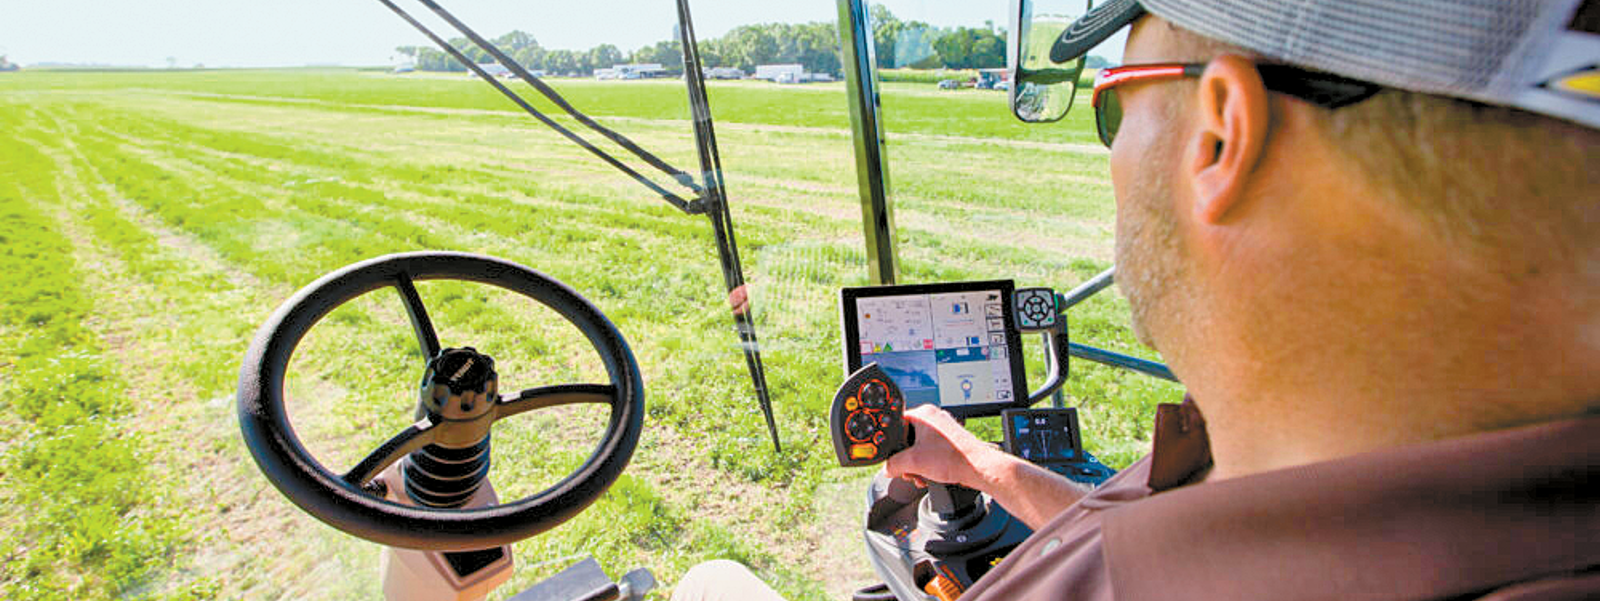 Commentary: Precision agriculture tech needs broadband access